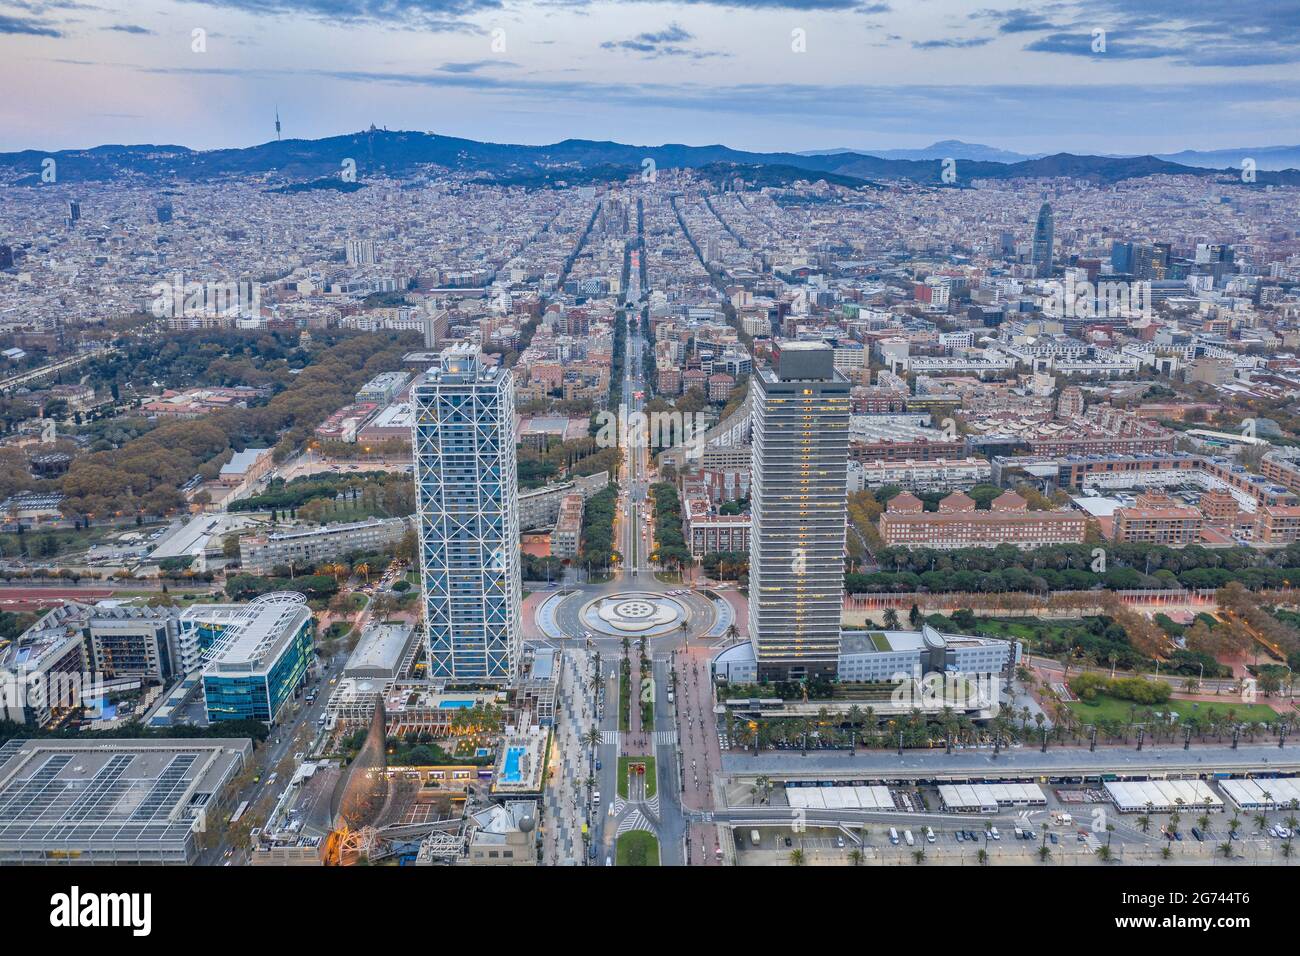 Aerial view of the Torres Mapfre (twin towers) in the Vila Olímpica district, in Barcelona, at twilight - sunrise (Barcelona, Catalonia, Spain) Stock Photo